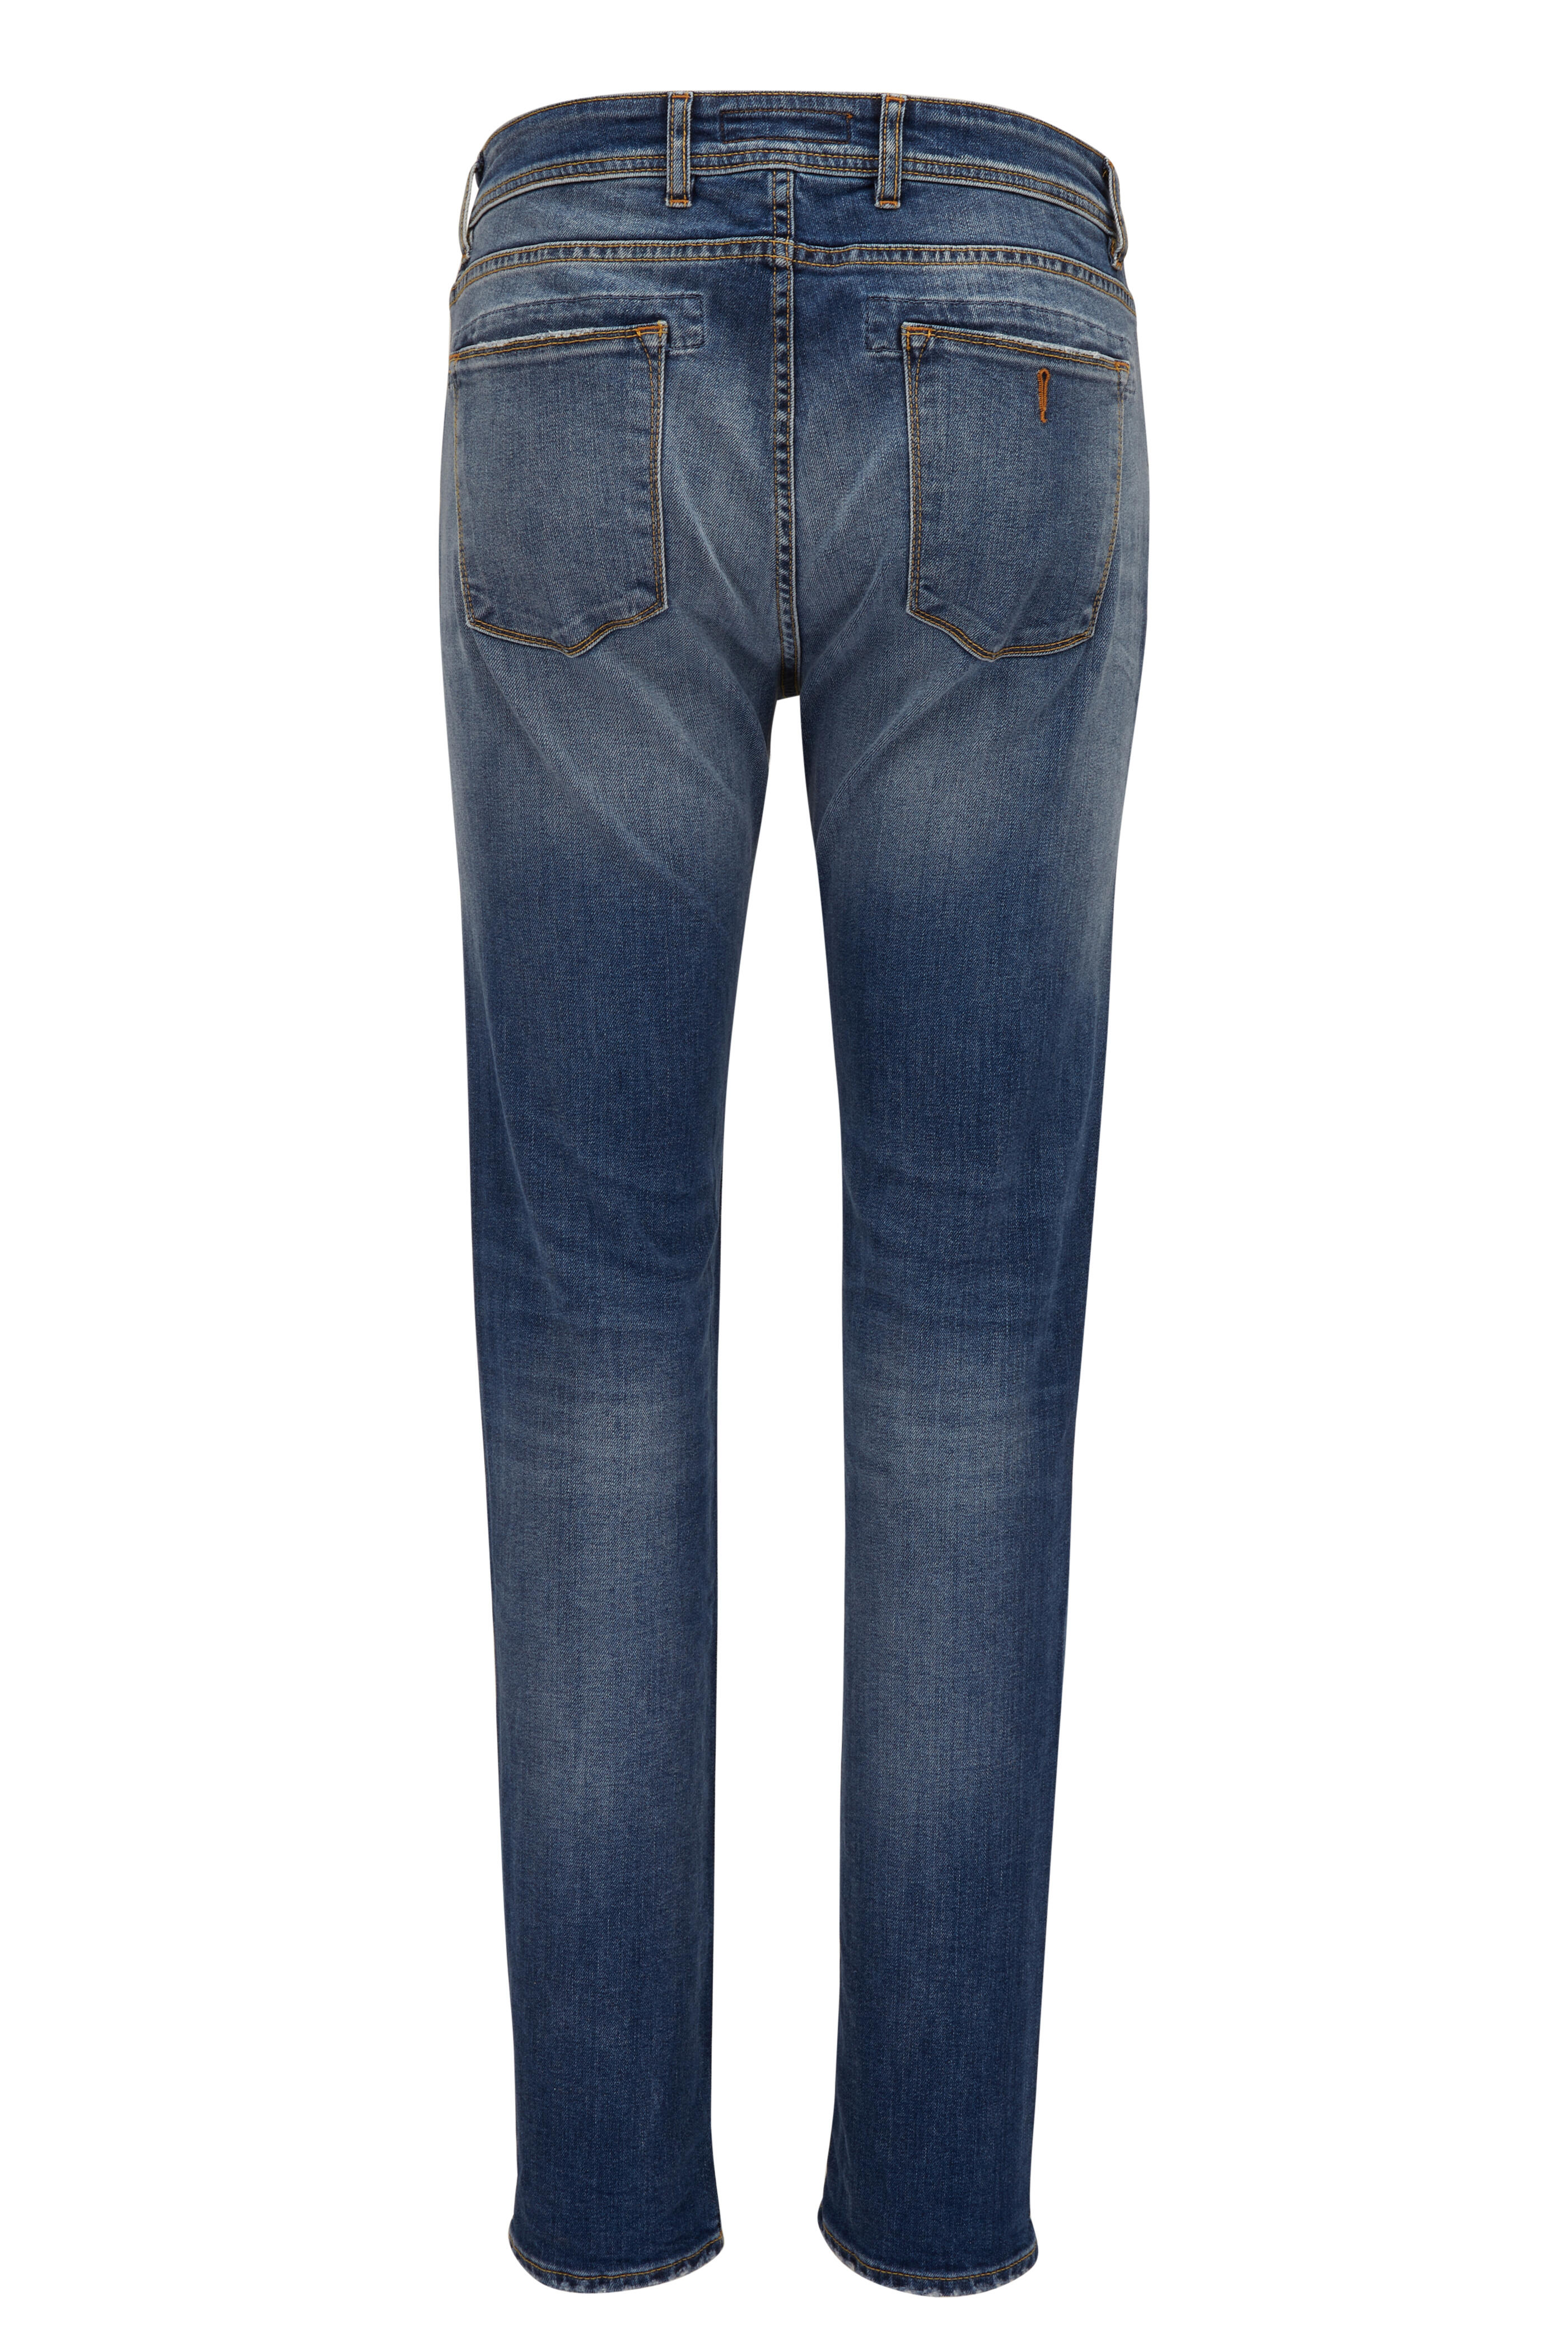 Barmas - Dean Blue Washed Vintage Jean | Mitchell Stores